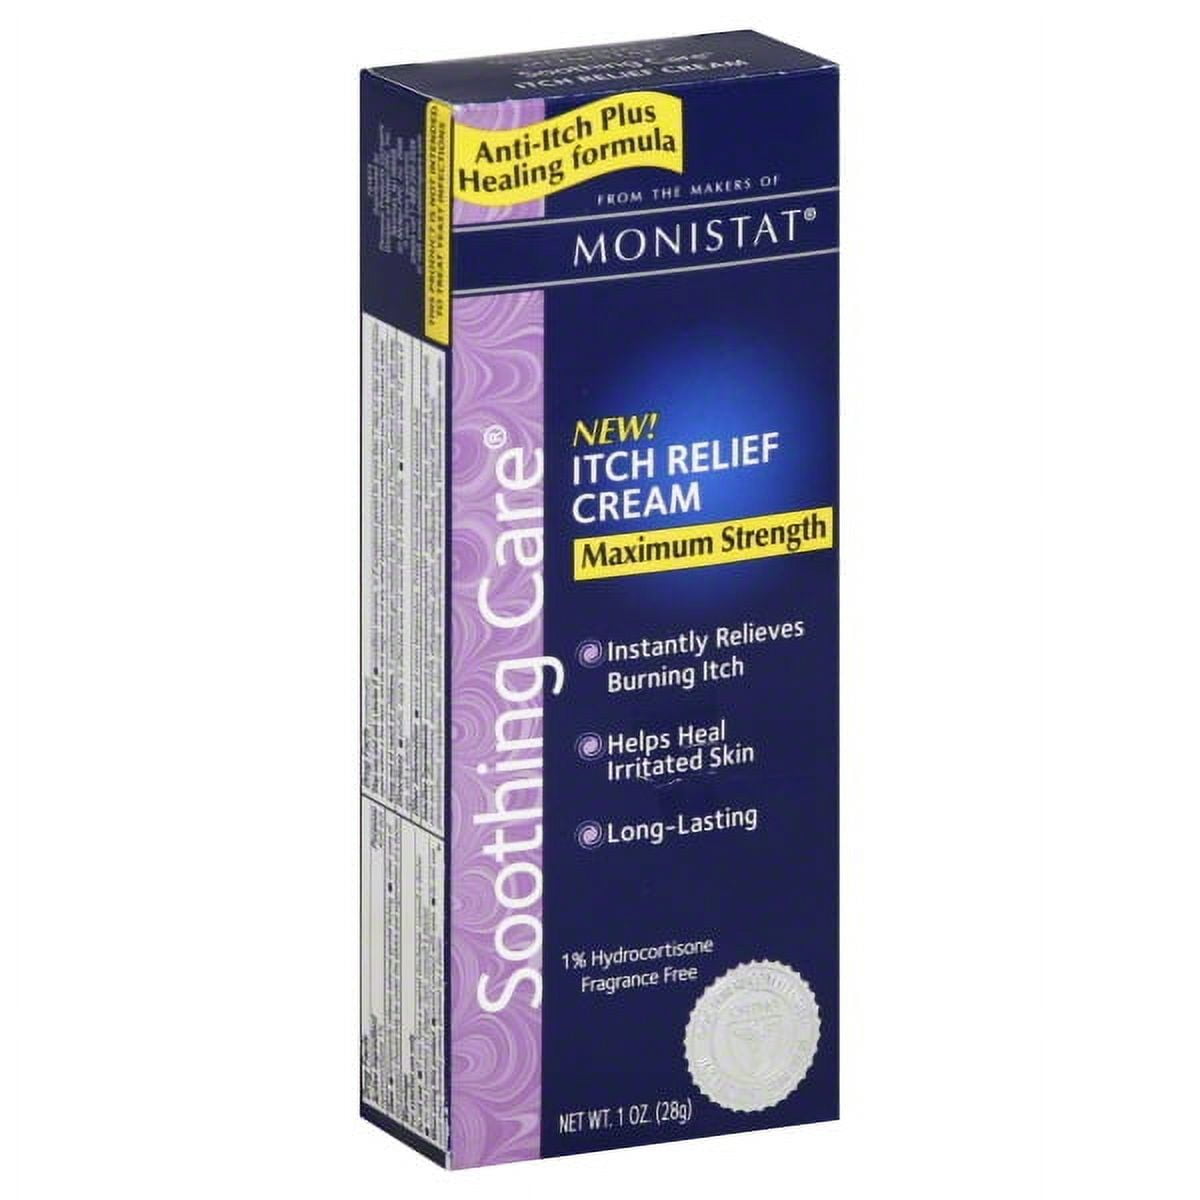 Monistat Soothing Care Chafing Relief Irritation Powder Gel, 1.5oz, 3-Pack